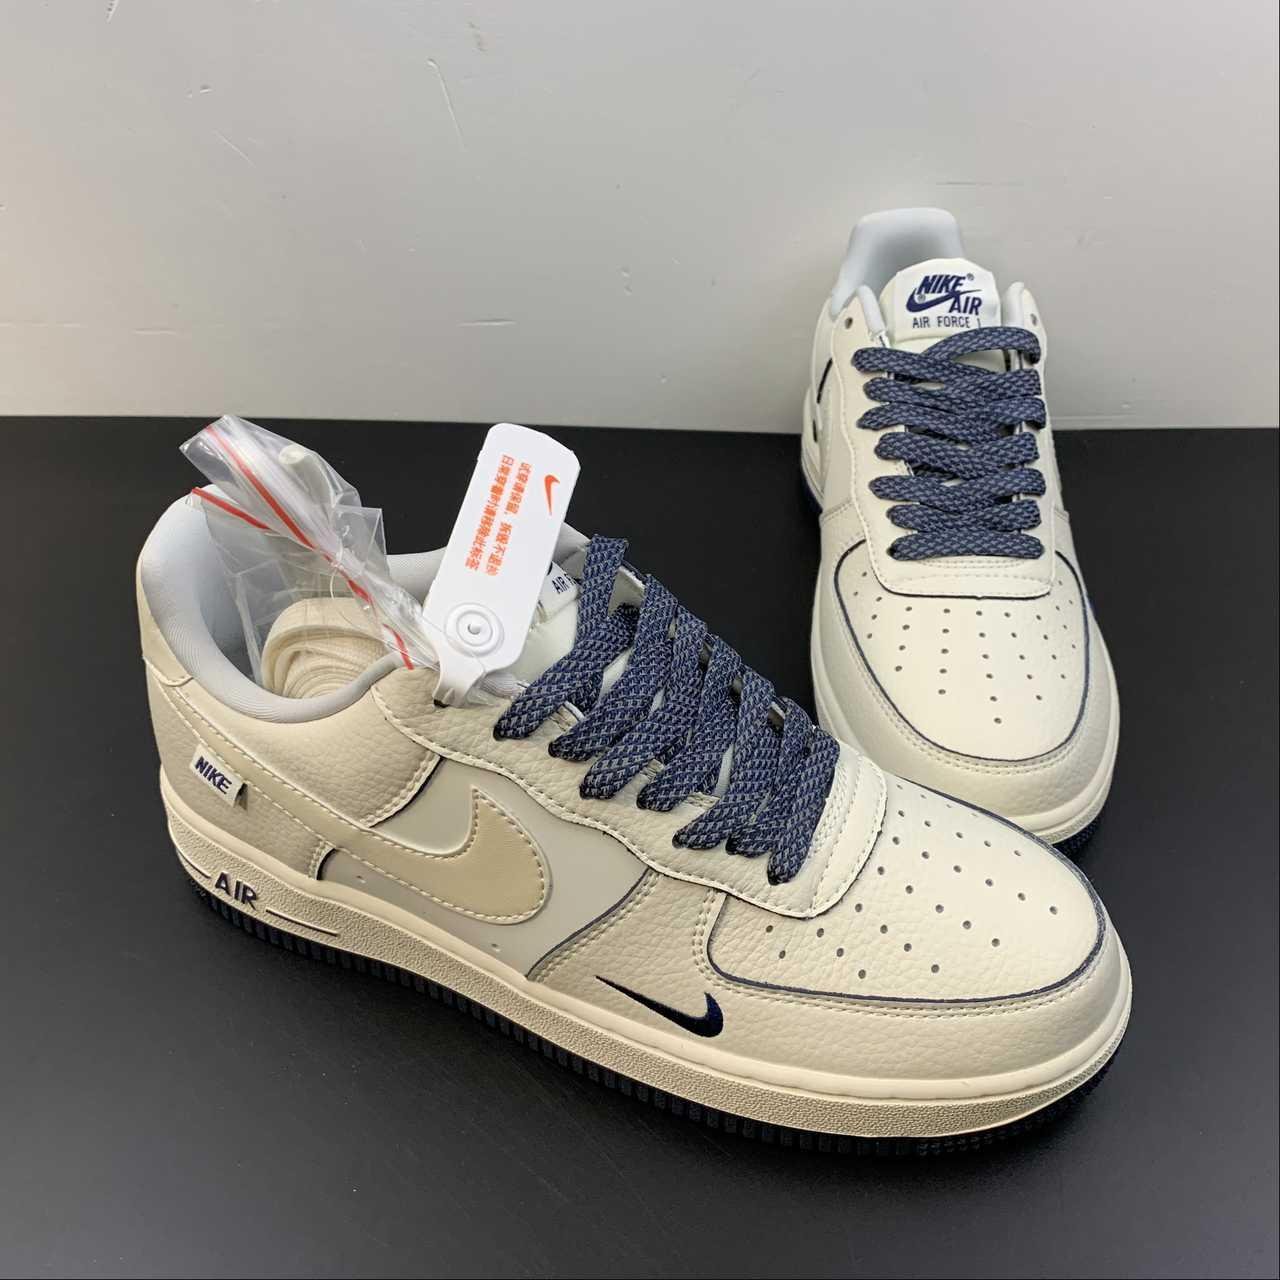      AIR FORCE 1 SHOES Air Force Low Top Casual Board Shoes DD9915-622